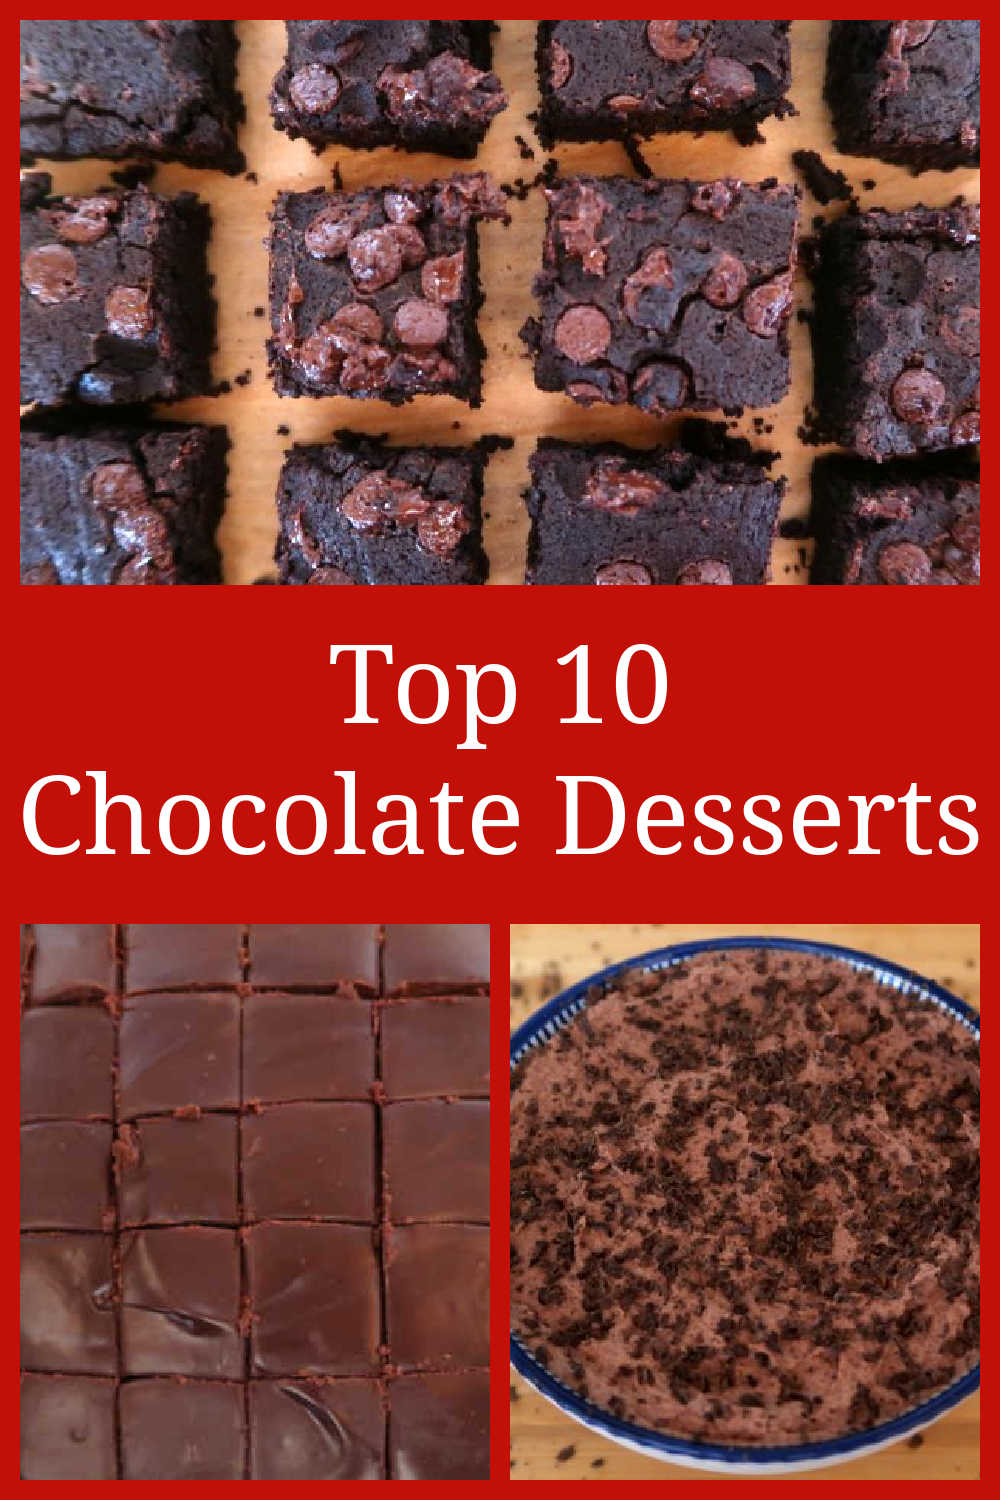 Top 10 Chocolate Desserts - The best easy decadent dessert recipes that taste good - the most popular, delicious treats of all time!